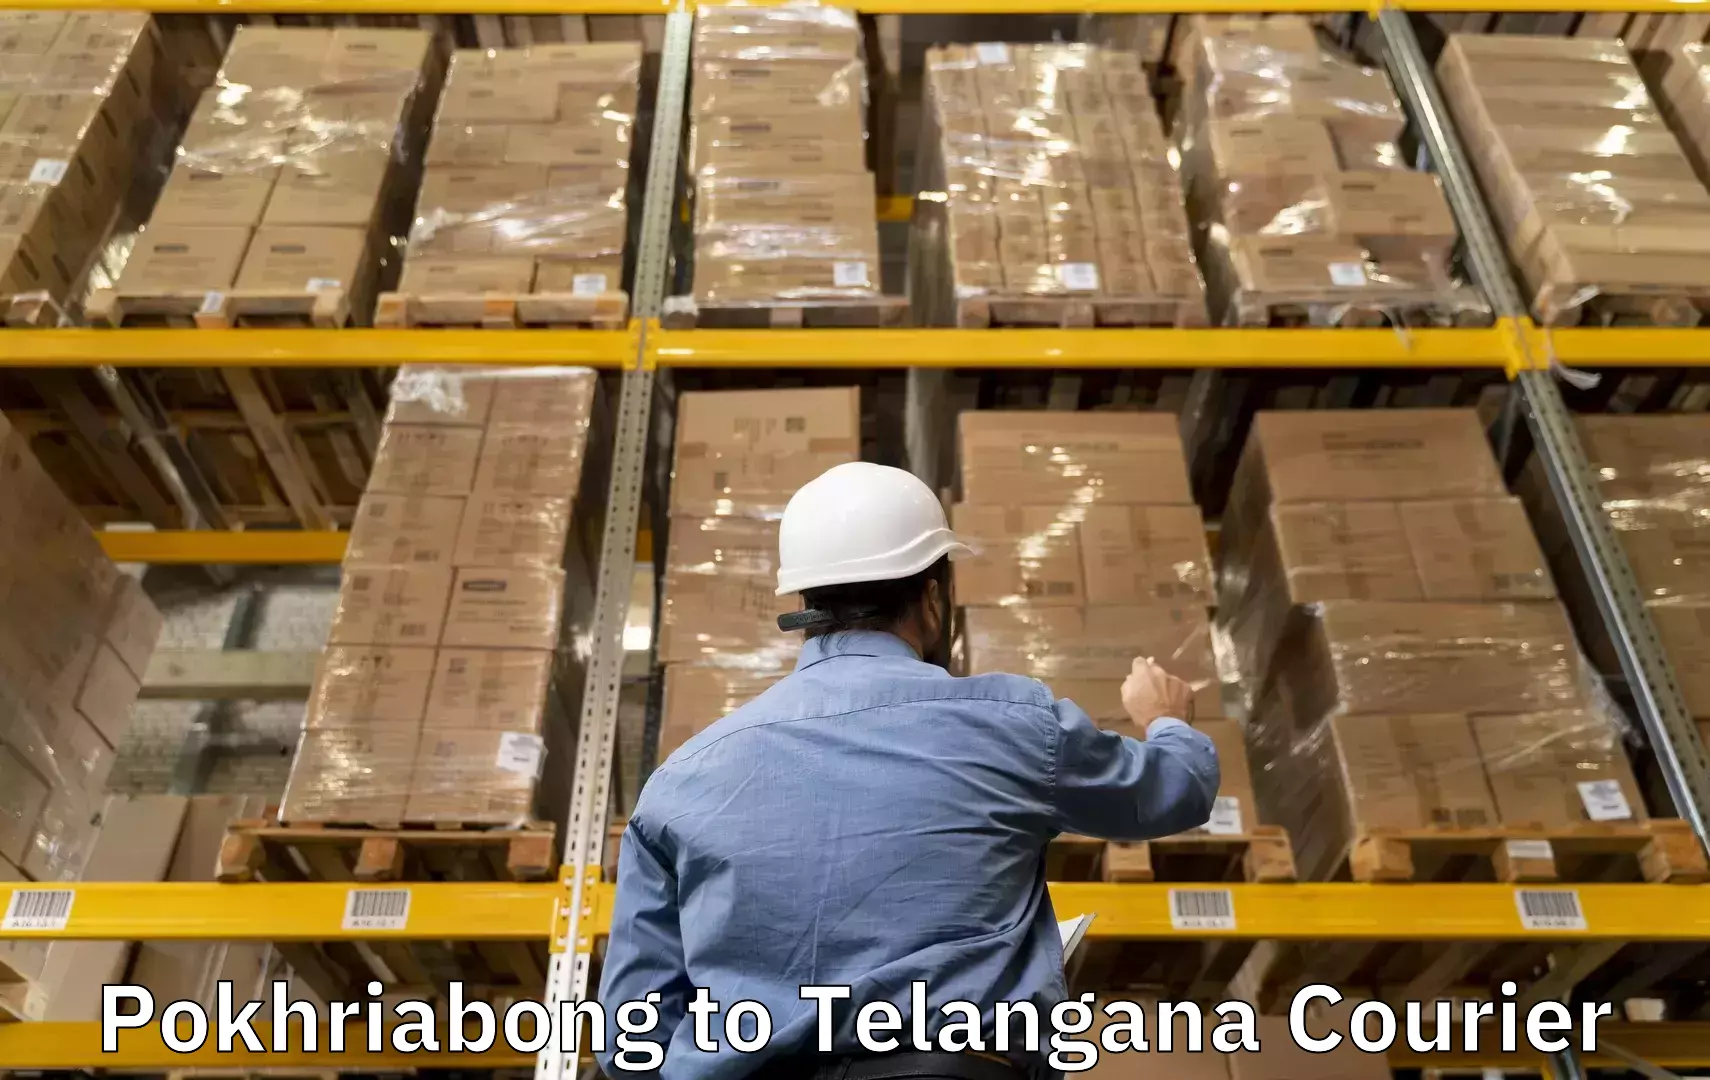 Luggage shipping planner Pokhriabong to Sikanderguda